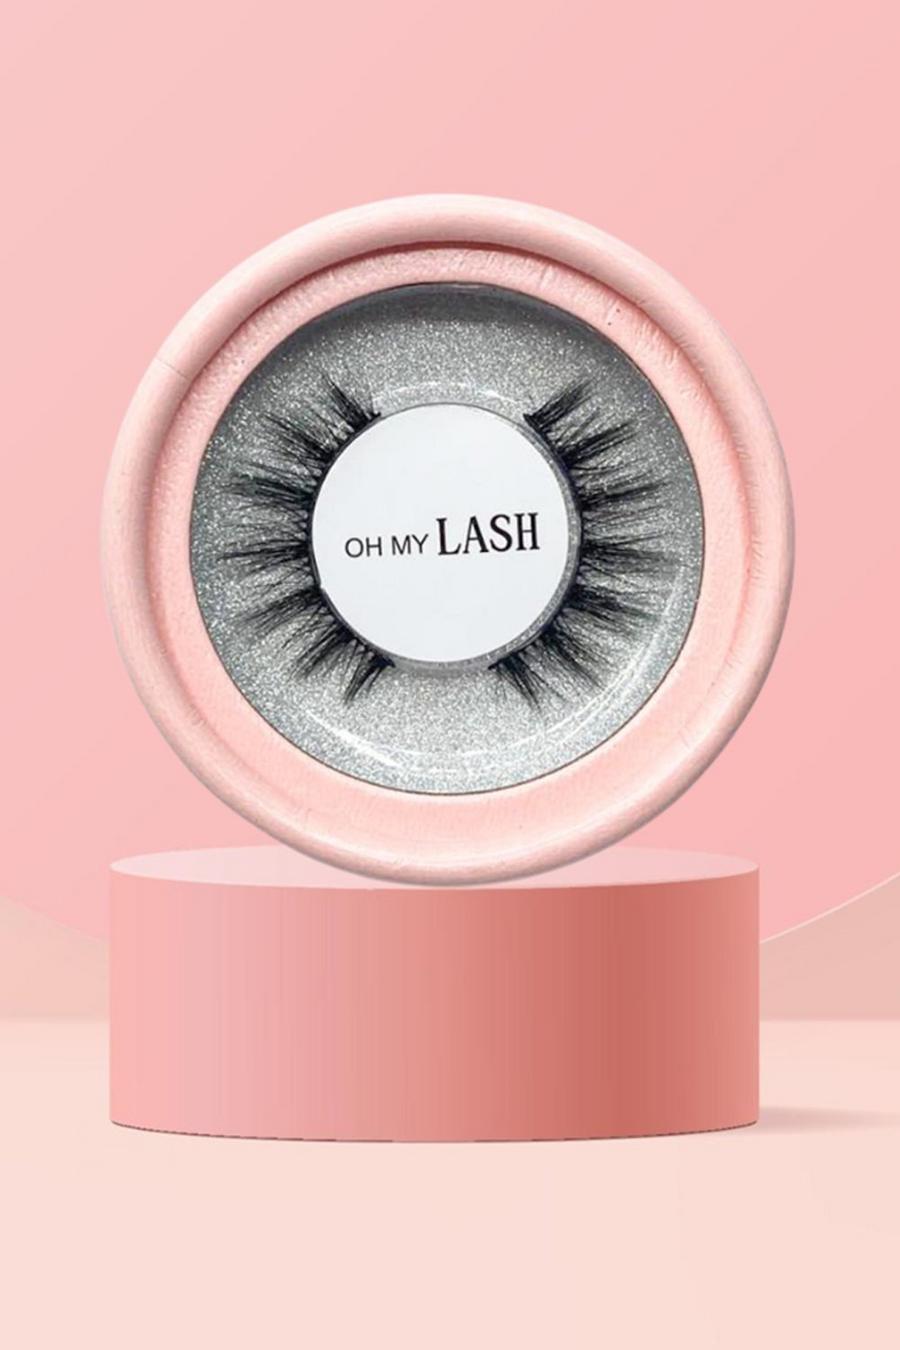 Oh My Lash - Faux cils - So Fetch, Argent image number 1